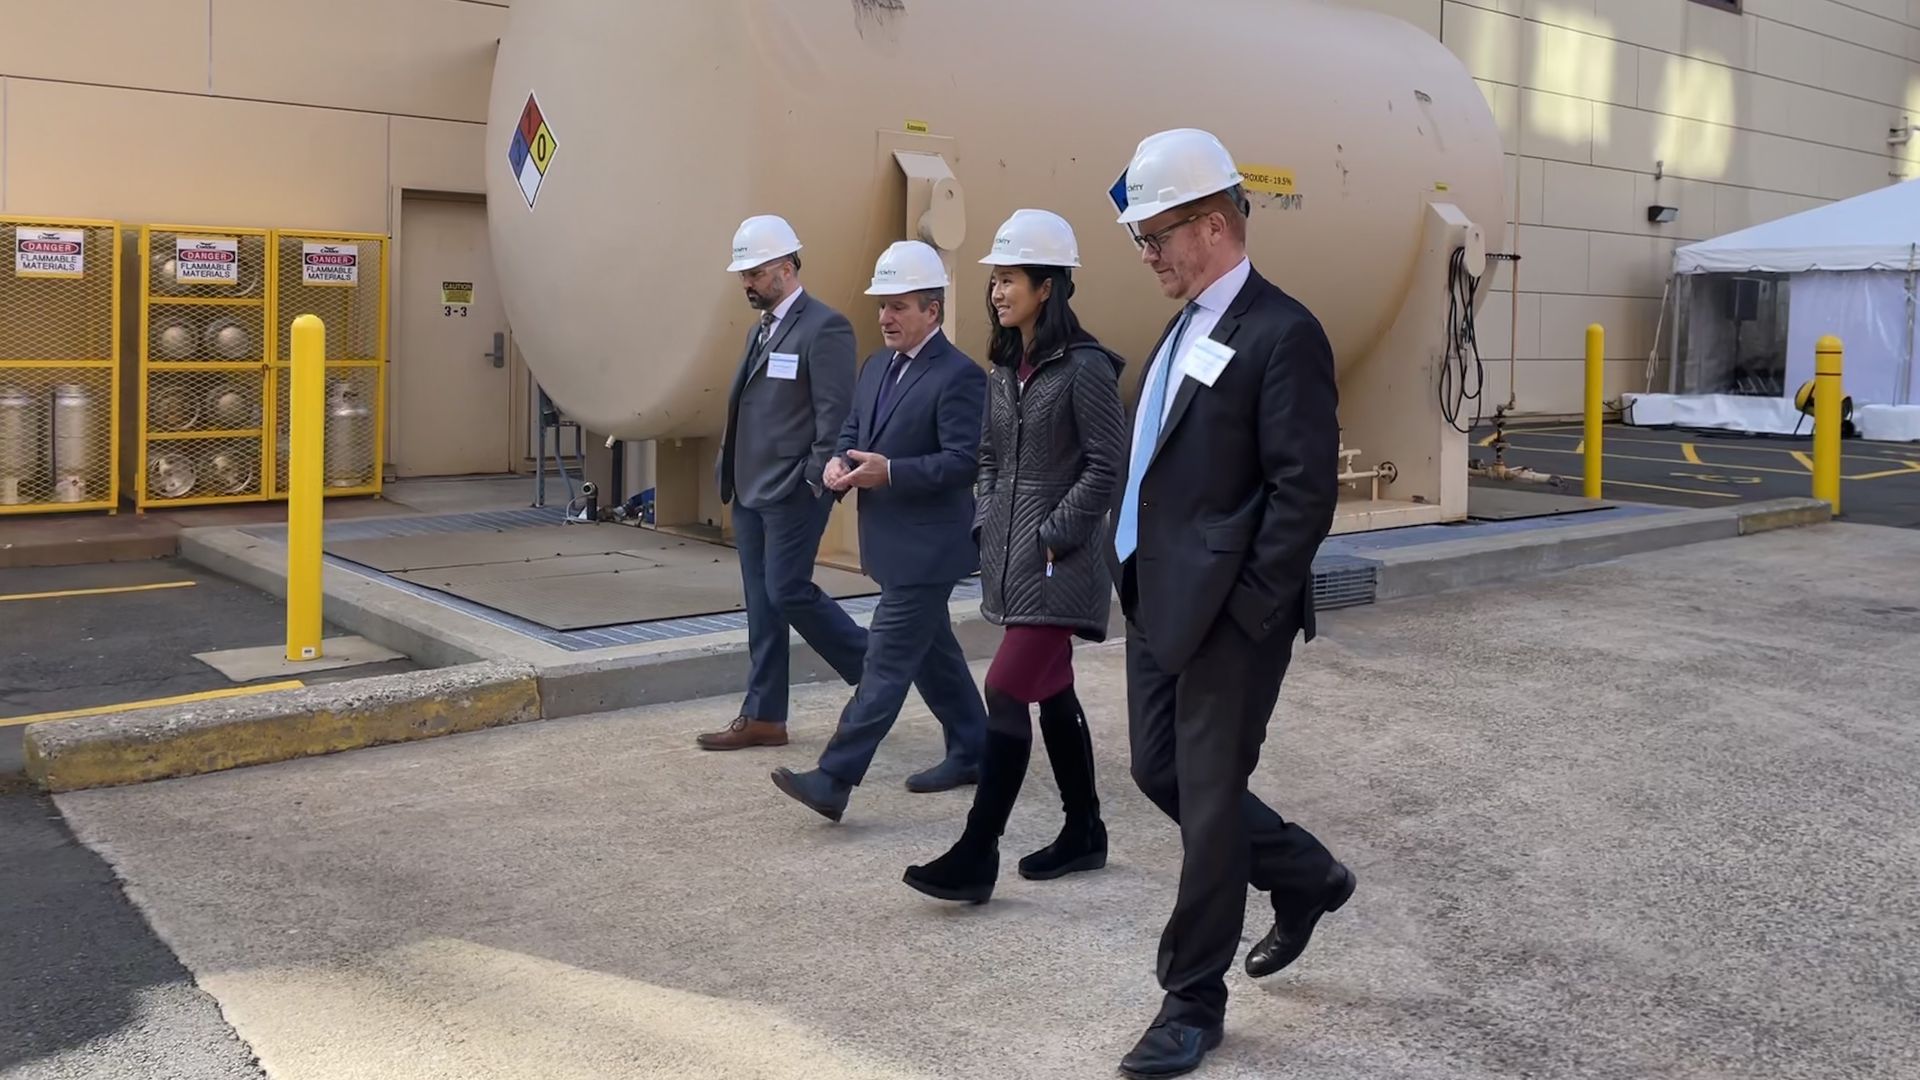 Vicinity executives walk beside Boston Mayor Michelle Wu, all of them wearing white hard hats, as they head into the company's Cambridge steam plant.